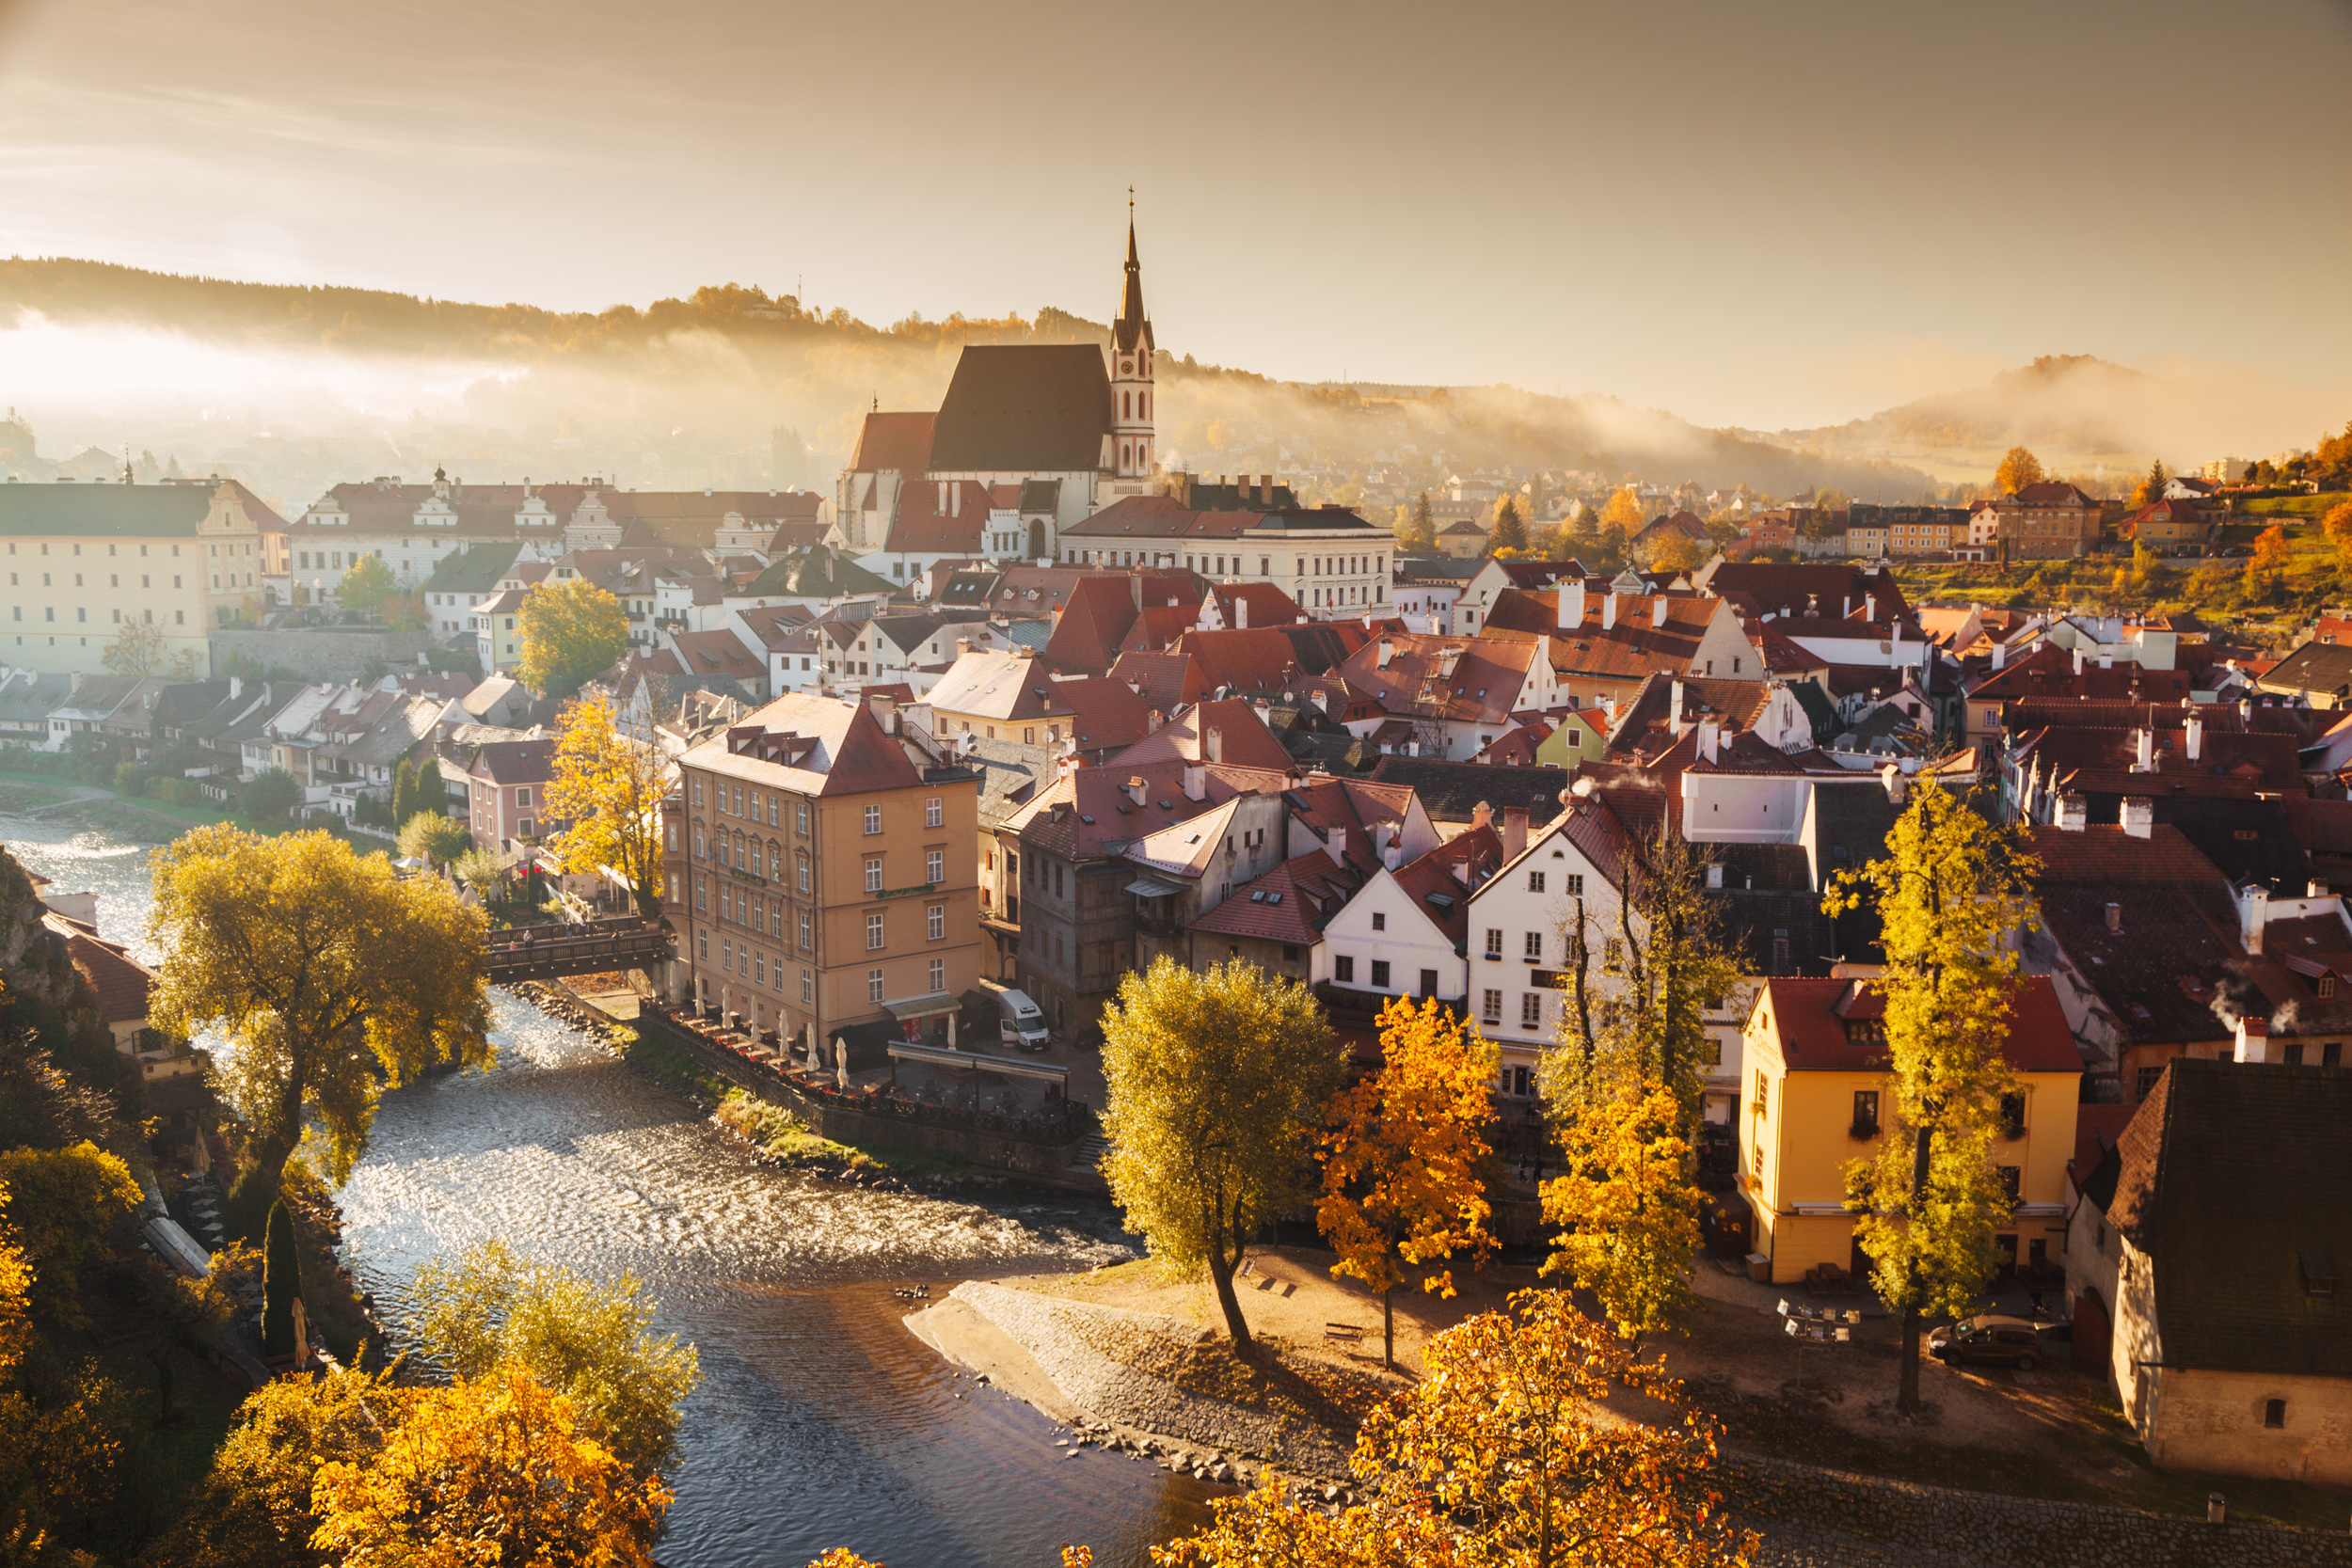 <p>Located just a couple of hours from Prague, this charming town is like a mini version of the capital city, where everything is much more walkable. The crown jewel however is the castle and surrounding grounds, which are very well preserved.</p><p><a href='https://www.msn.com/en-us/community/channel/vid-cj9pqbr0vn9in2b6ddcd8sfgpfq6x6utp44fssrv6mc2gtybw0us'>Did you enjoy this slideshow? Follow us on MSN to see more of our exclusive lifestyle content.</a></p>